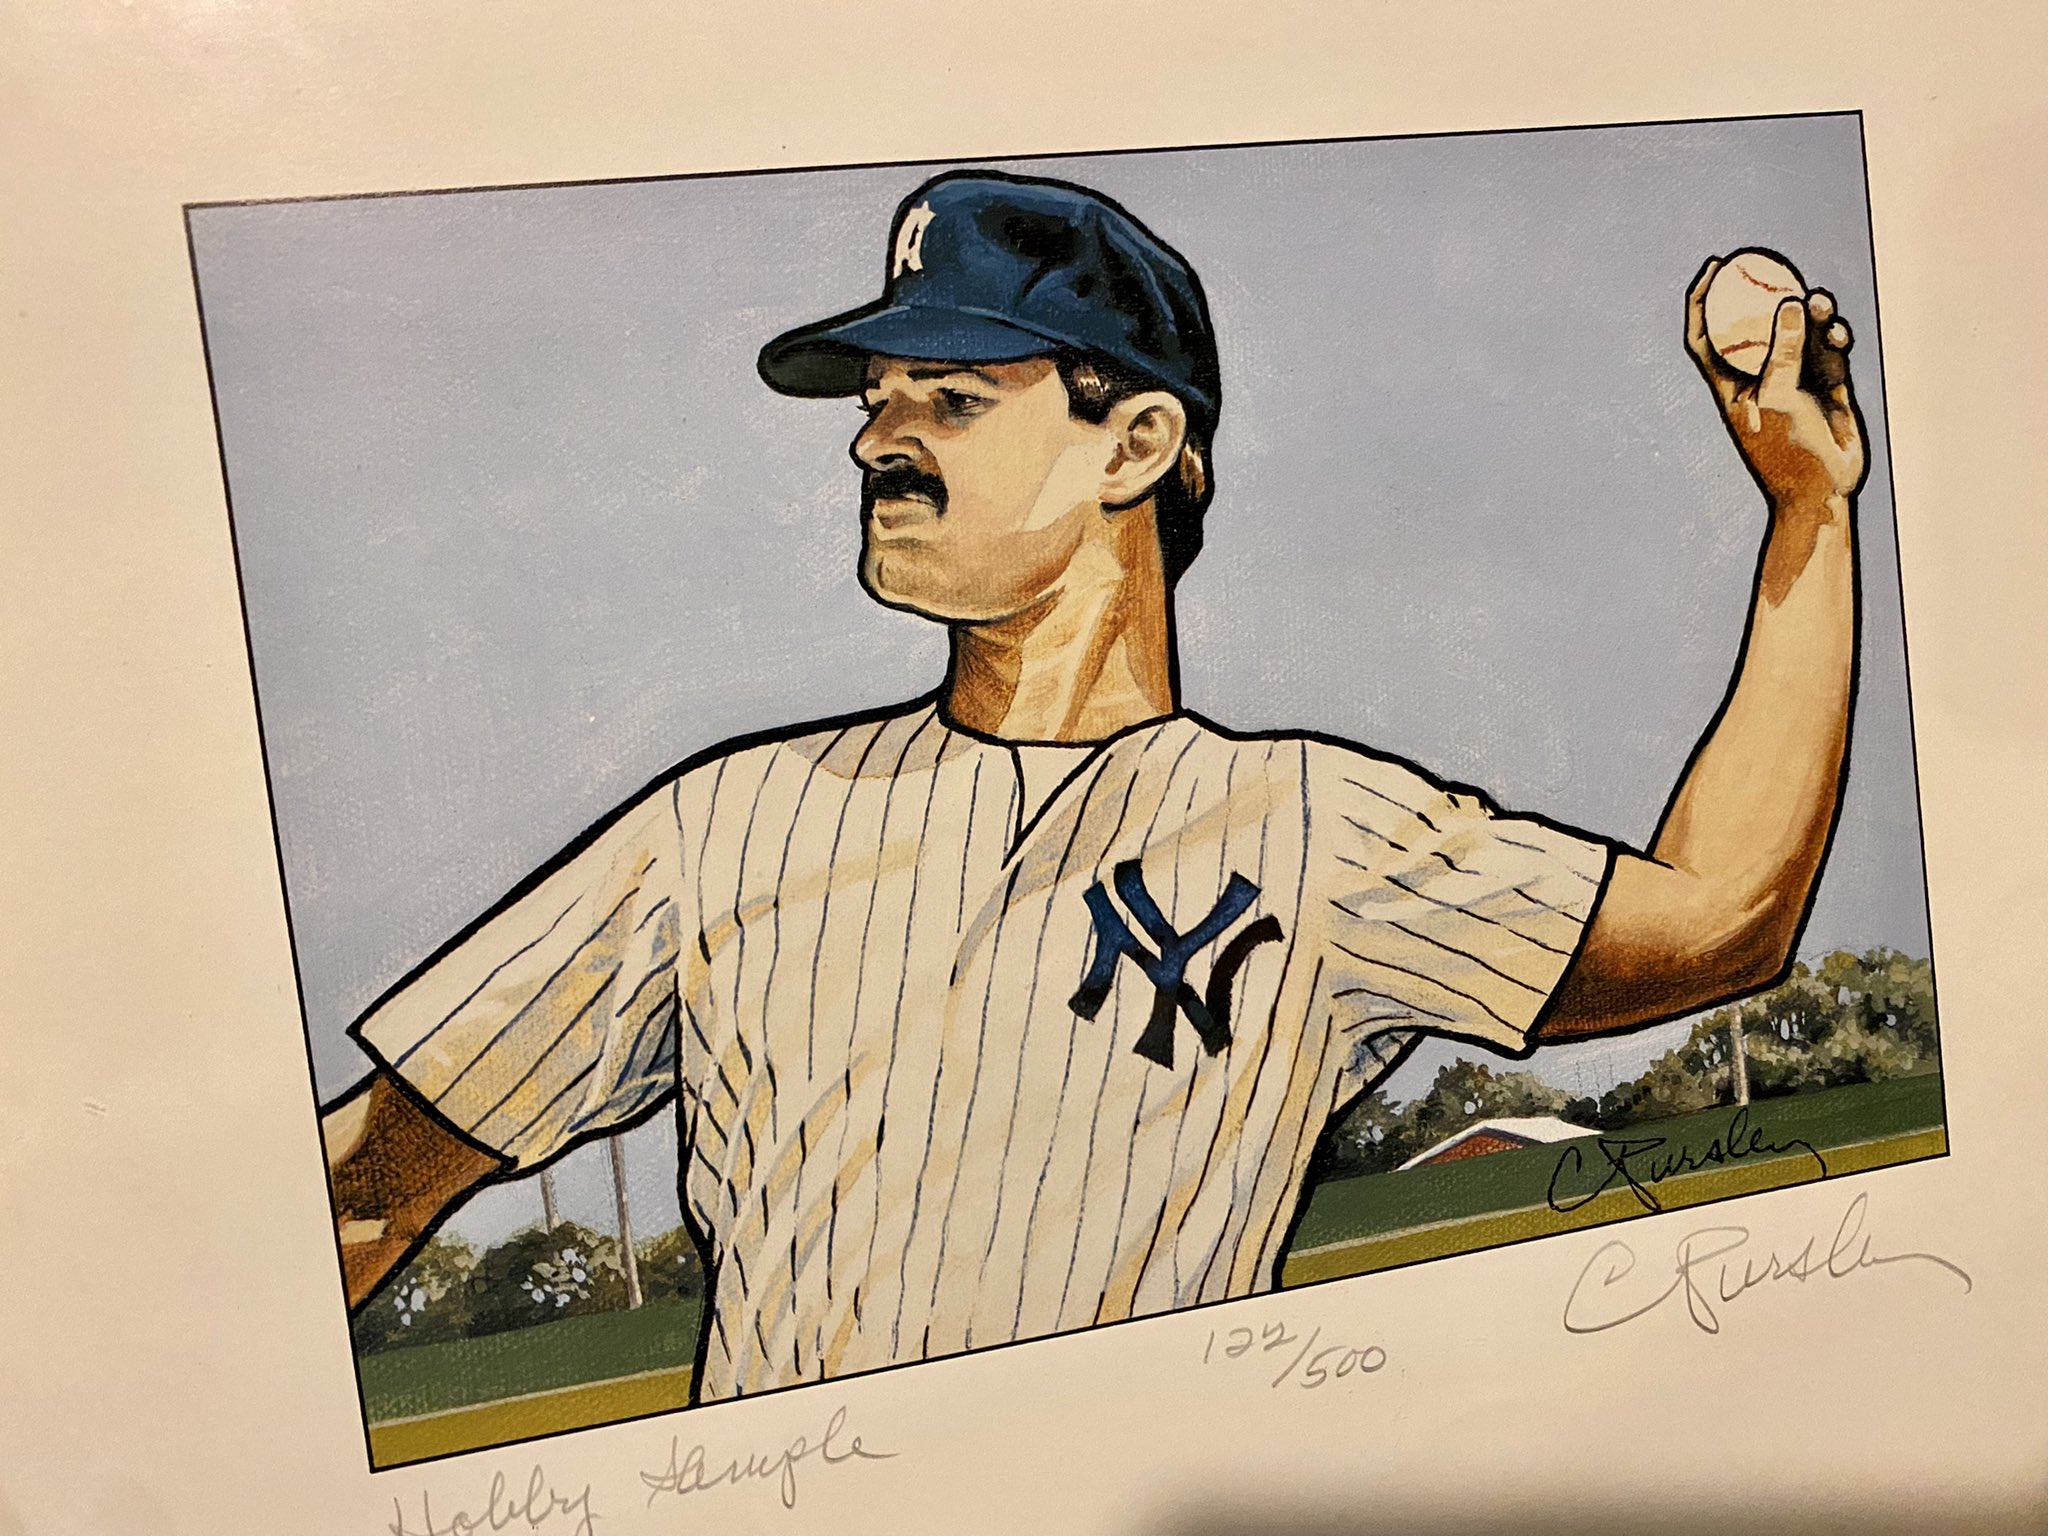 robmillertime on X: Turns out cleaning the house has its perks. I just  found this original Don Mattingly Baseball Card Lithograph from like 1986.  No idea what it's worth if anything. #nyy #